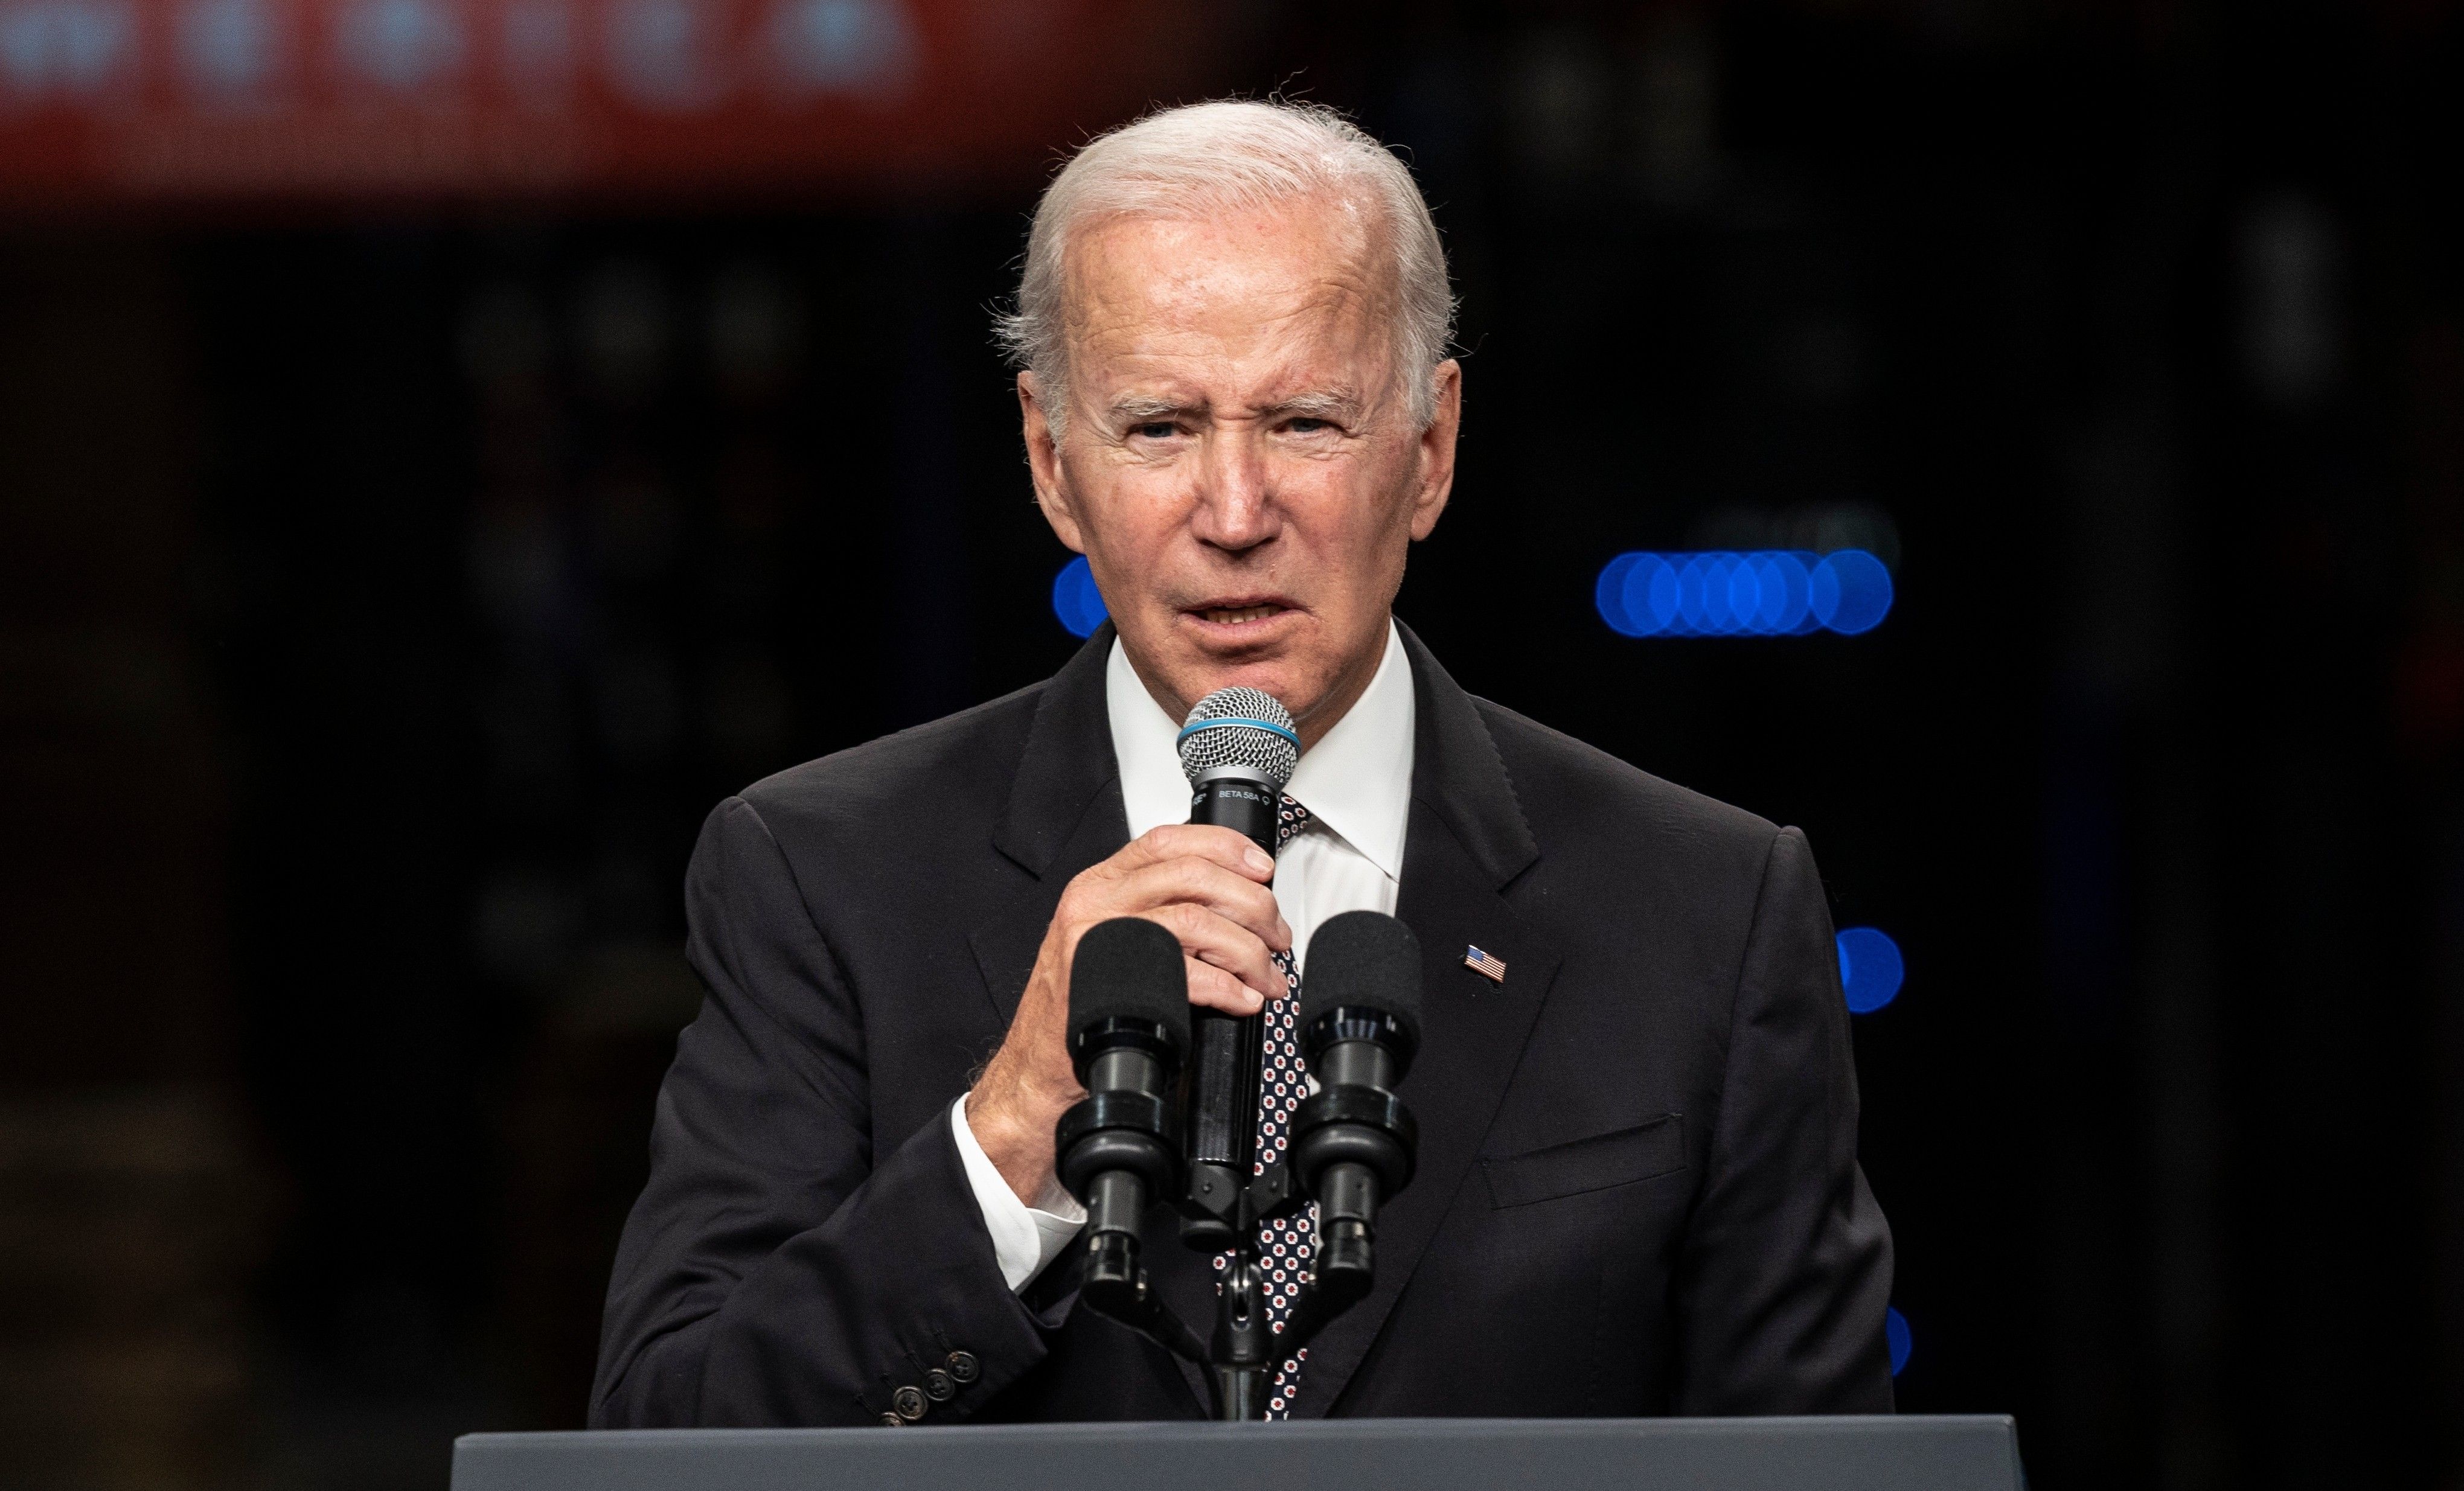 Is Biden taking the Iran nuclear deal off life support?